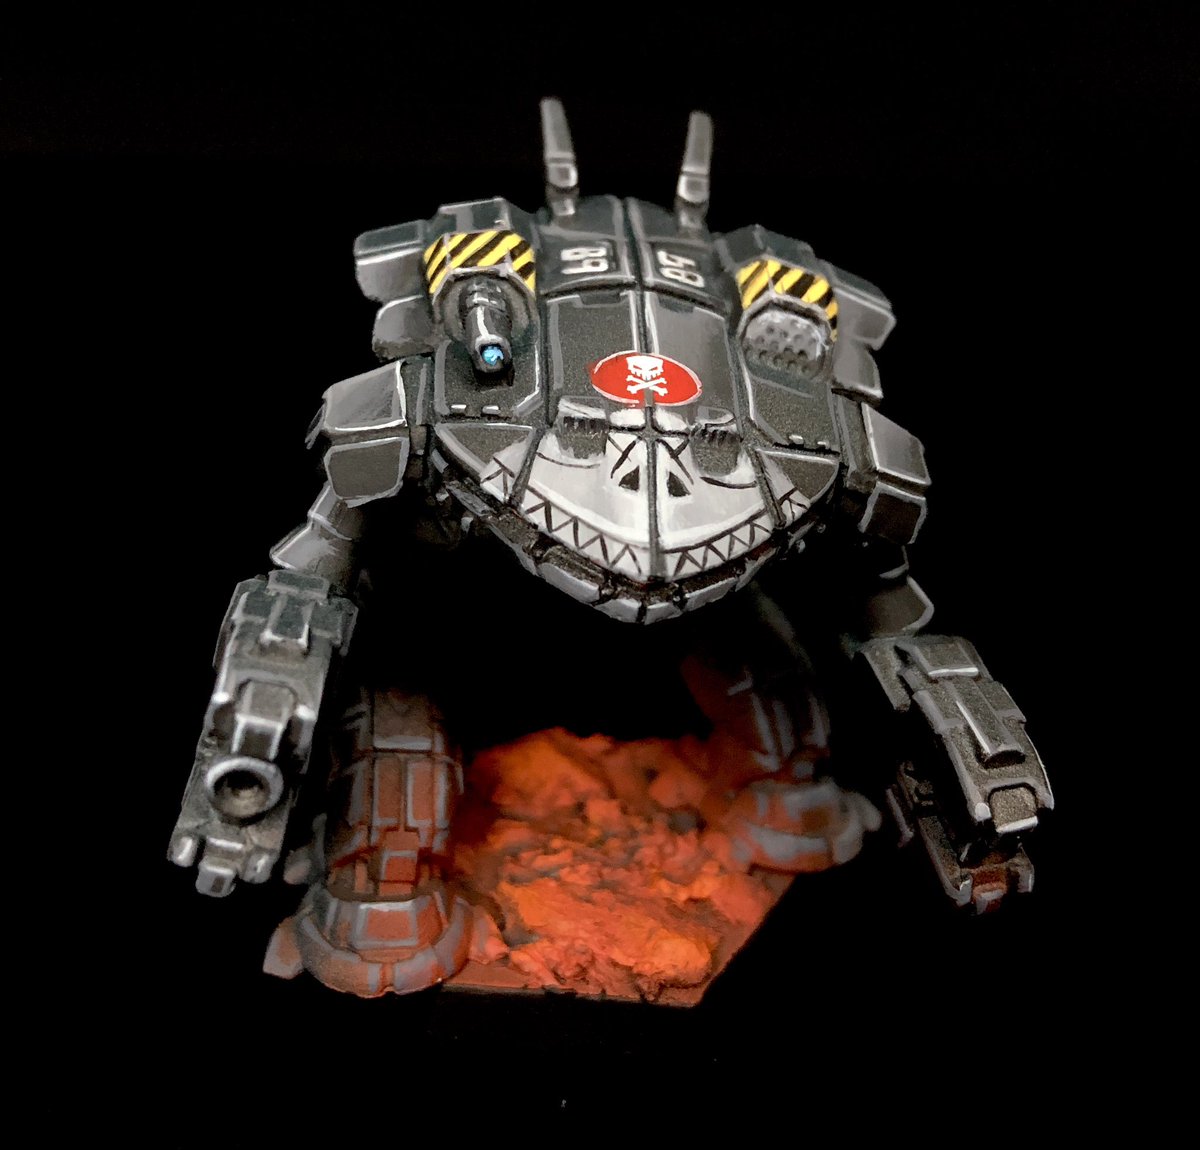 Next up is the King Crab (again), this time in pirate colours! This was requested through @renegadehpg #paintingminiatures #battletech